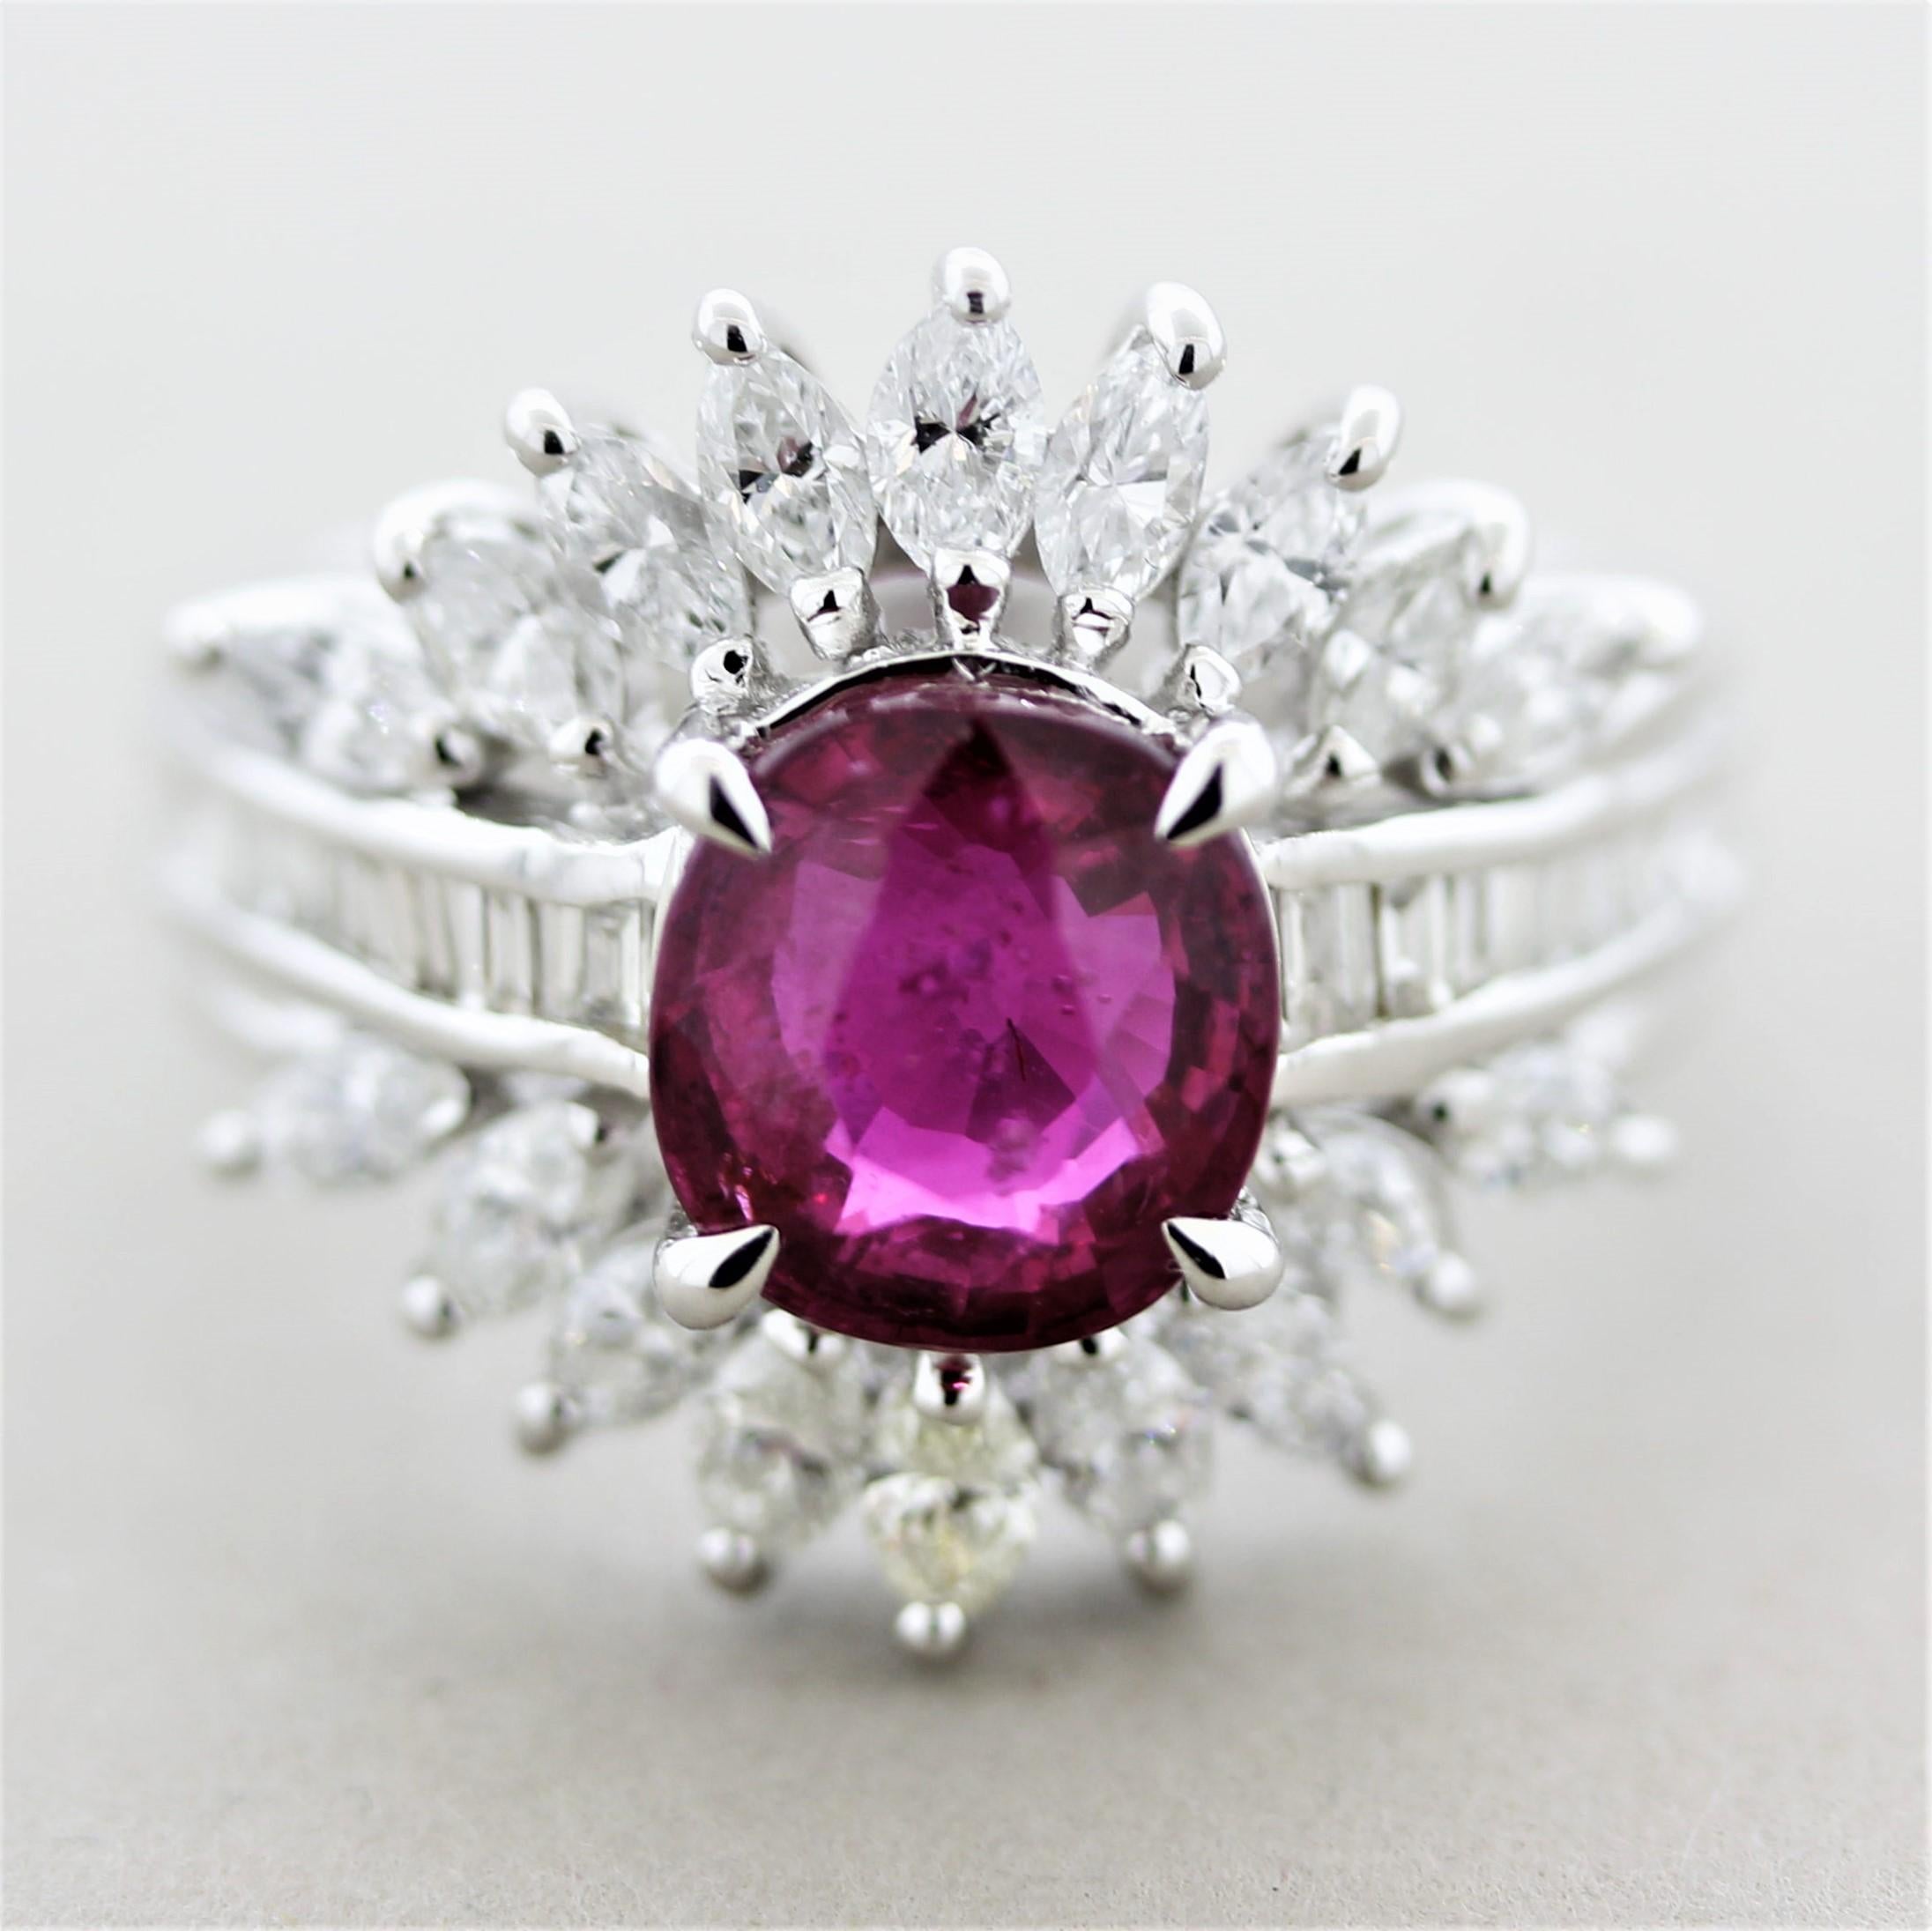 A superb ring featuring a rare unheated ruby. It weighs exactly 3.00 carats and is certified by the GIA as natural with no treatments, very rare for ruby. It has a bright and lively slightly pinkish-red color that dances in the light. It is accented